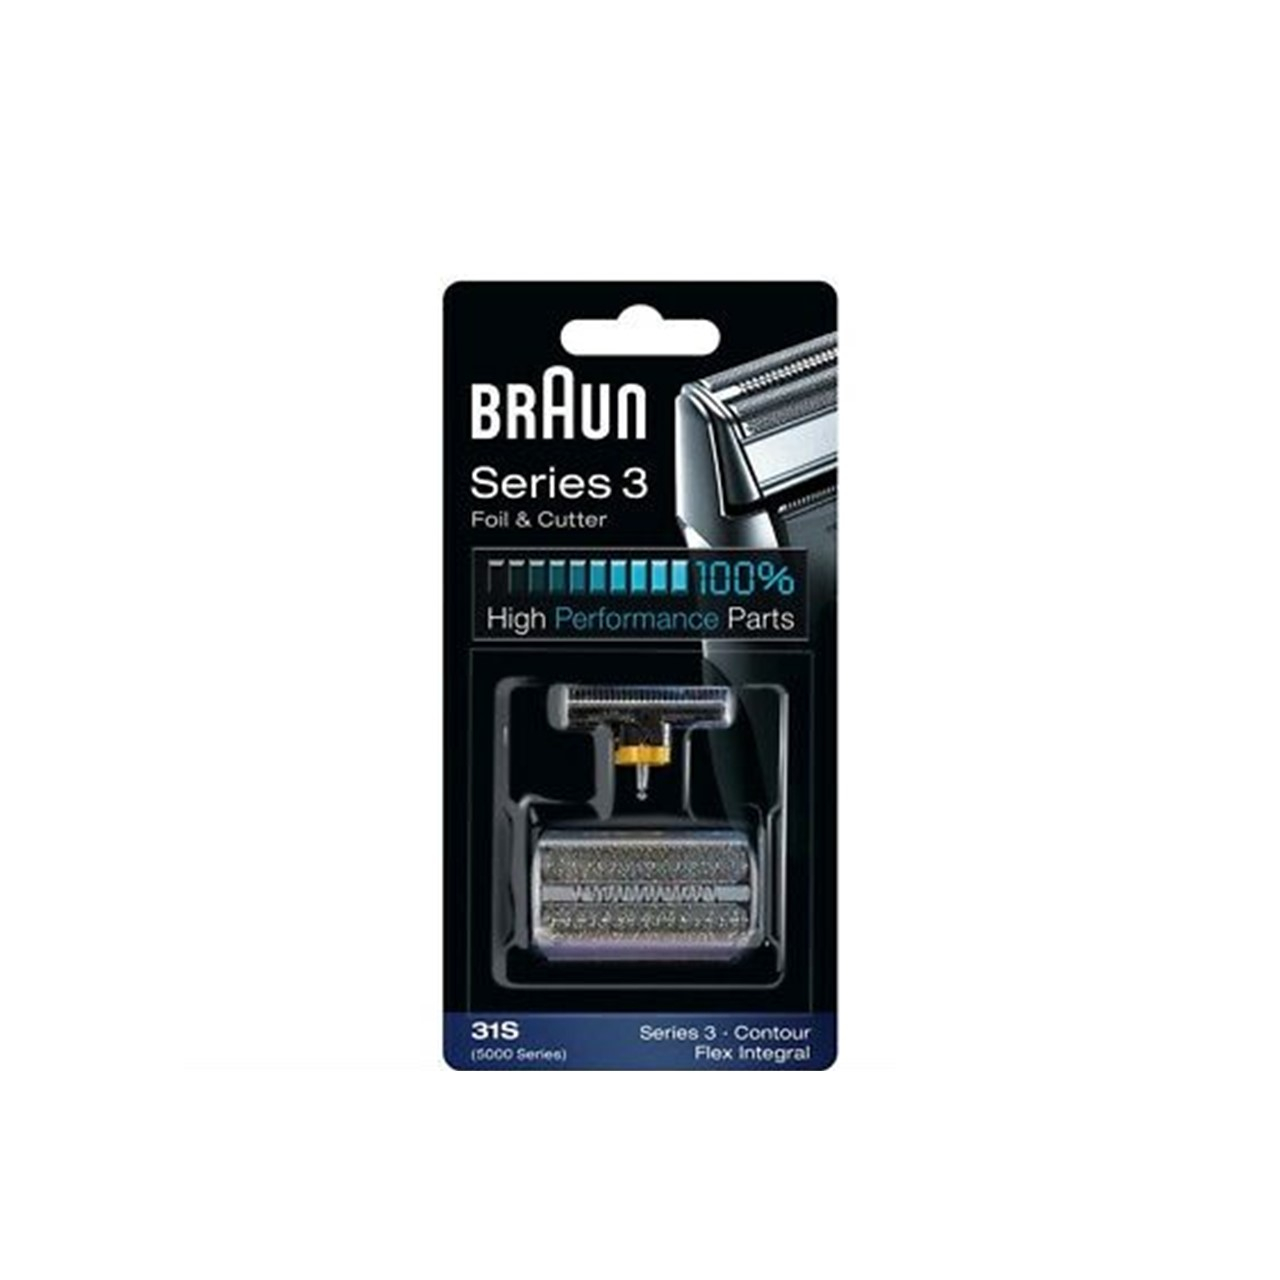 Braun Series 3 Electric Shaver Replacement Foil & Cutter 31S